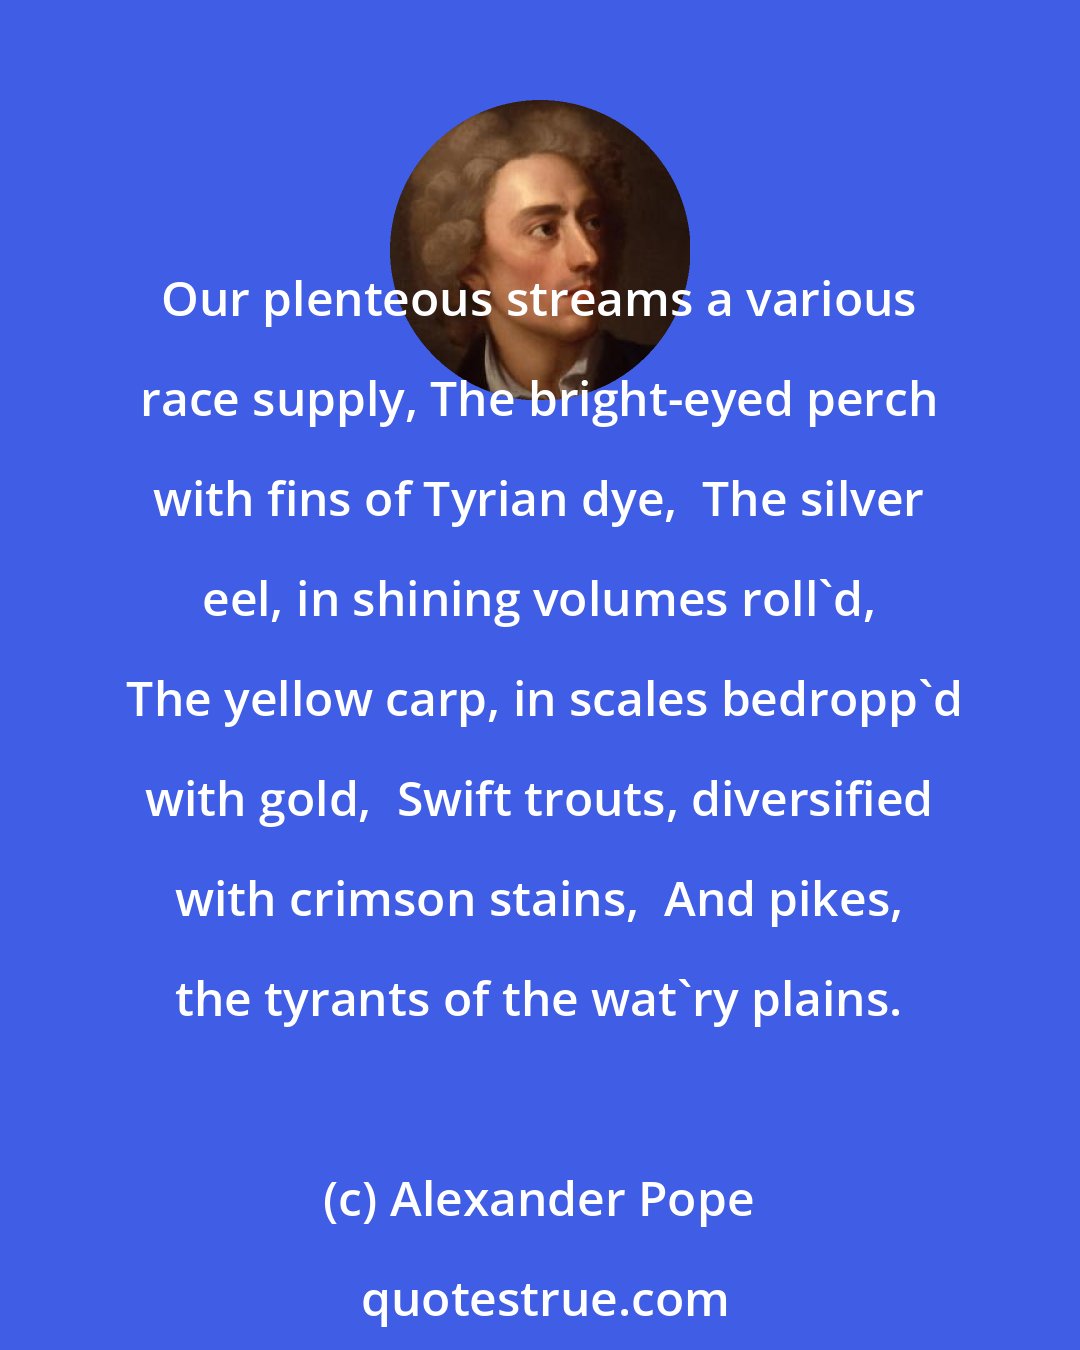 Alexander Pope: Our plenteous streams a various race supply, The bright-eyed perch with fins of Tyrian dye,  The silver eel, in shining volumes roll'd,  The yellow carp, in scales bedropp'd with gold,  Swift trouts, diversified with crimson stains,  And pikes, the tyrants of the wat'ry plains.